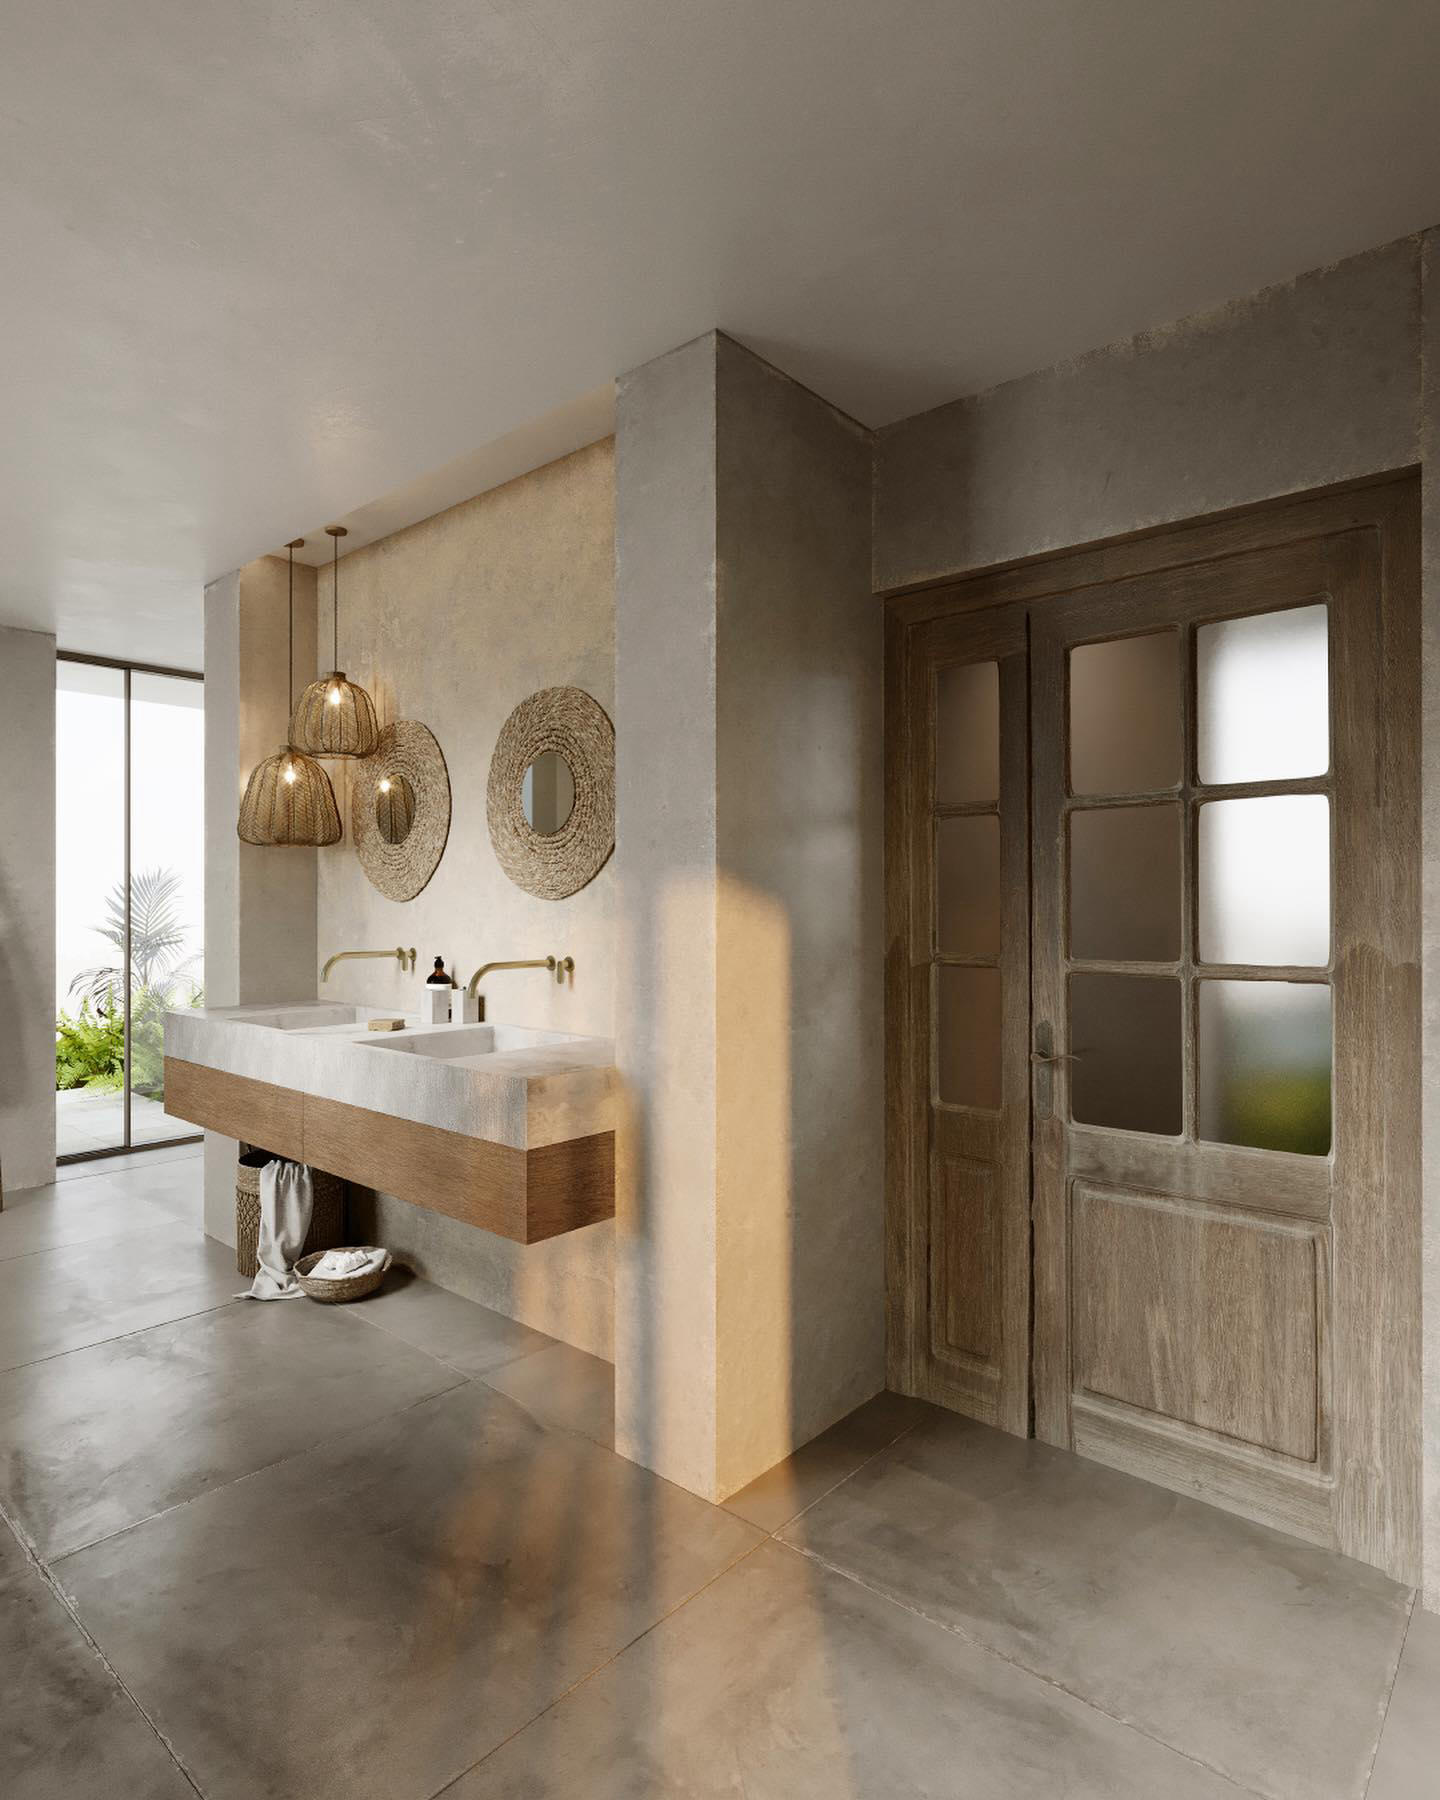 Lordd_Products - #cocoonbathroom designed this Rustic chic bathroom, which part is your favorite